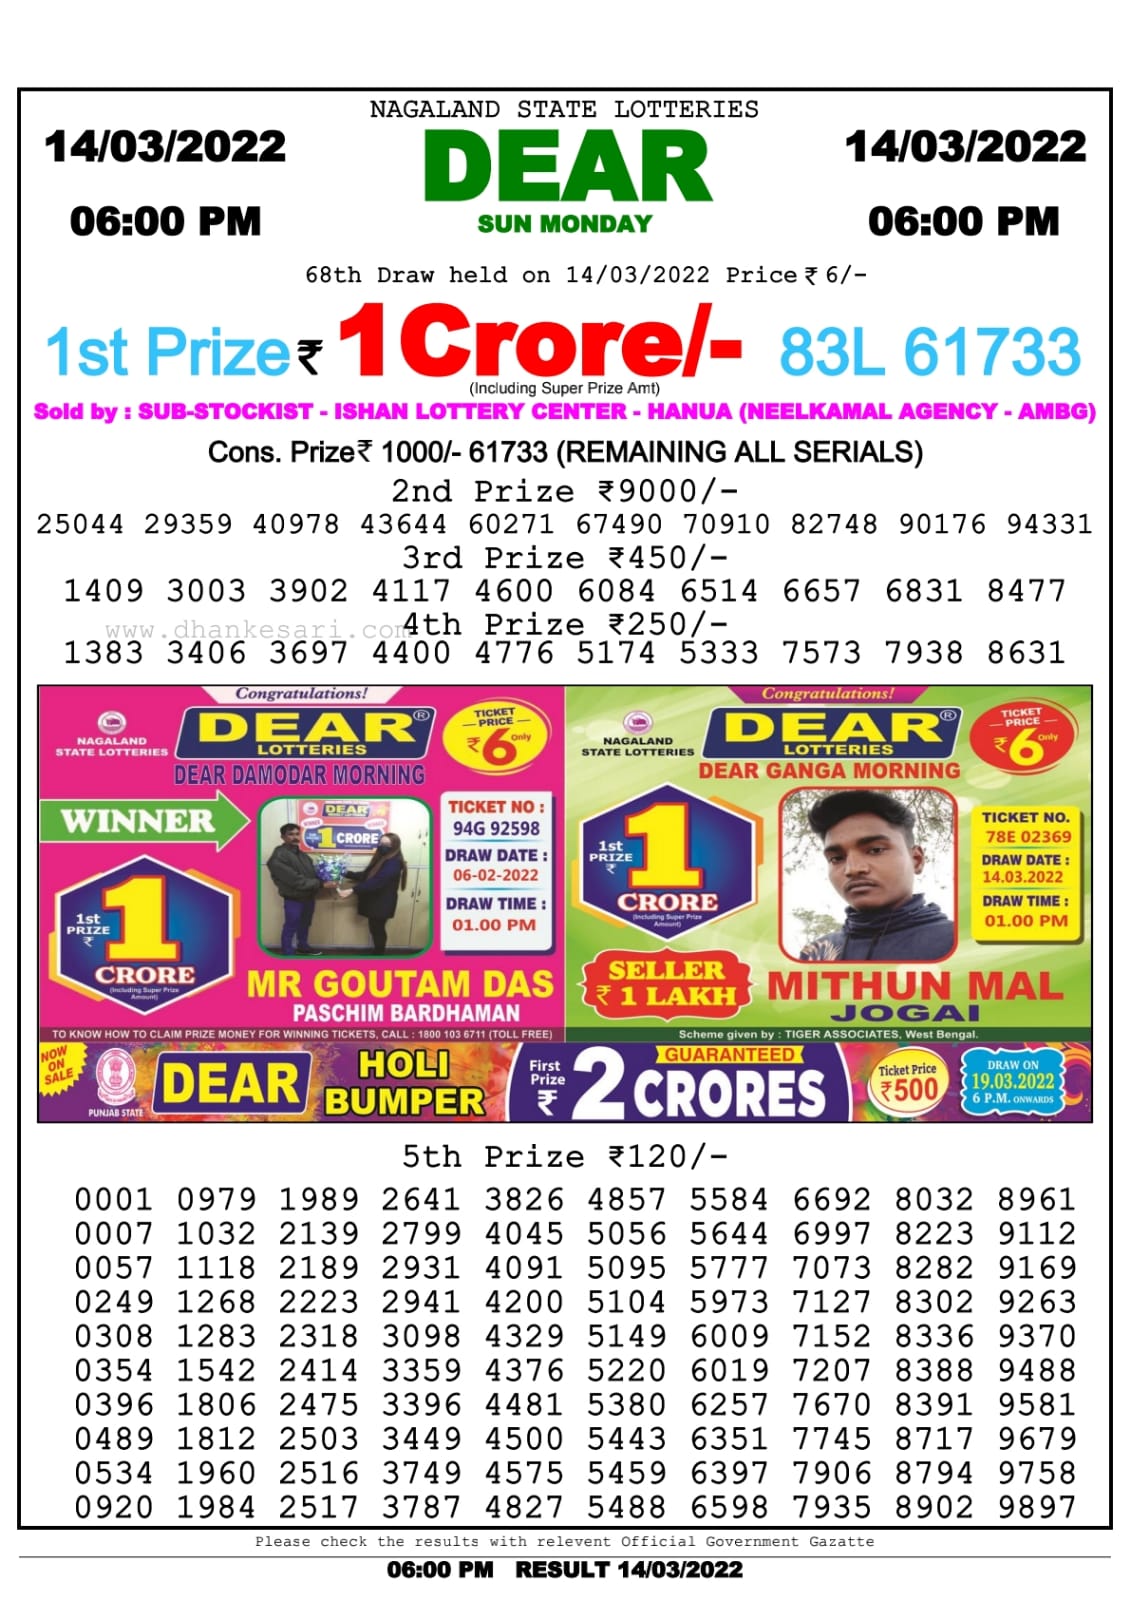 Dear Lottery Nagaland state Lottery Results 06.00 pm 14.03.2022